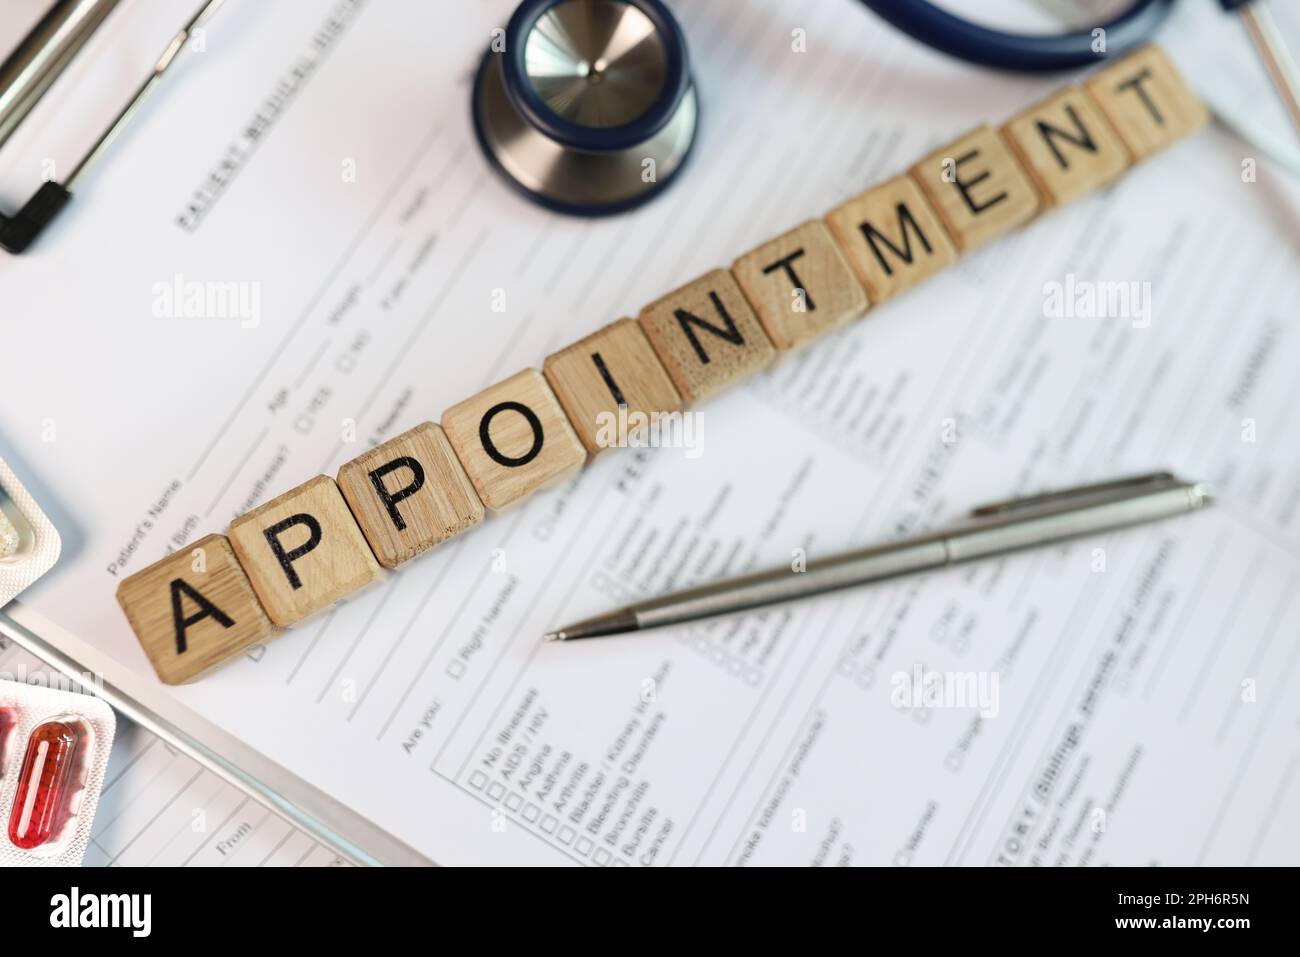 Word Appointment made with wooden cubes on medical records Stock Photo